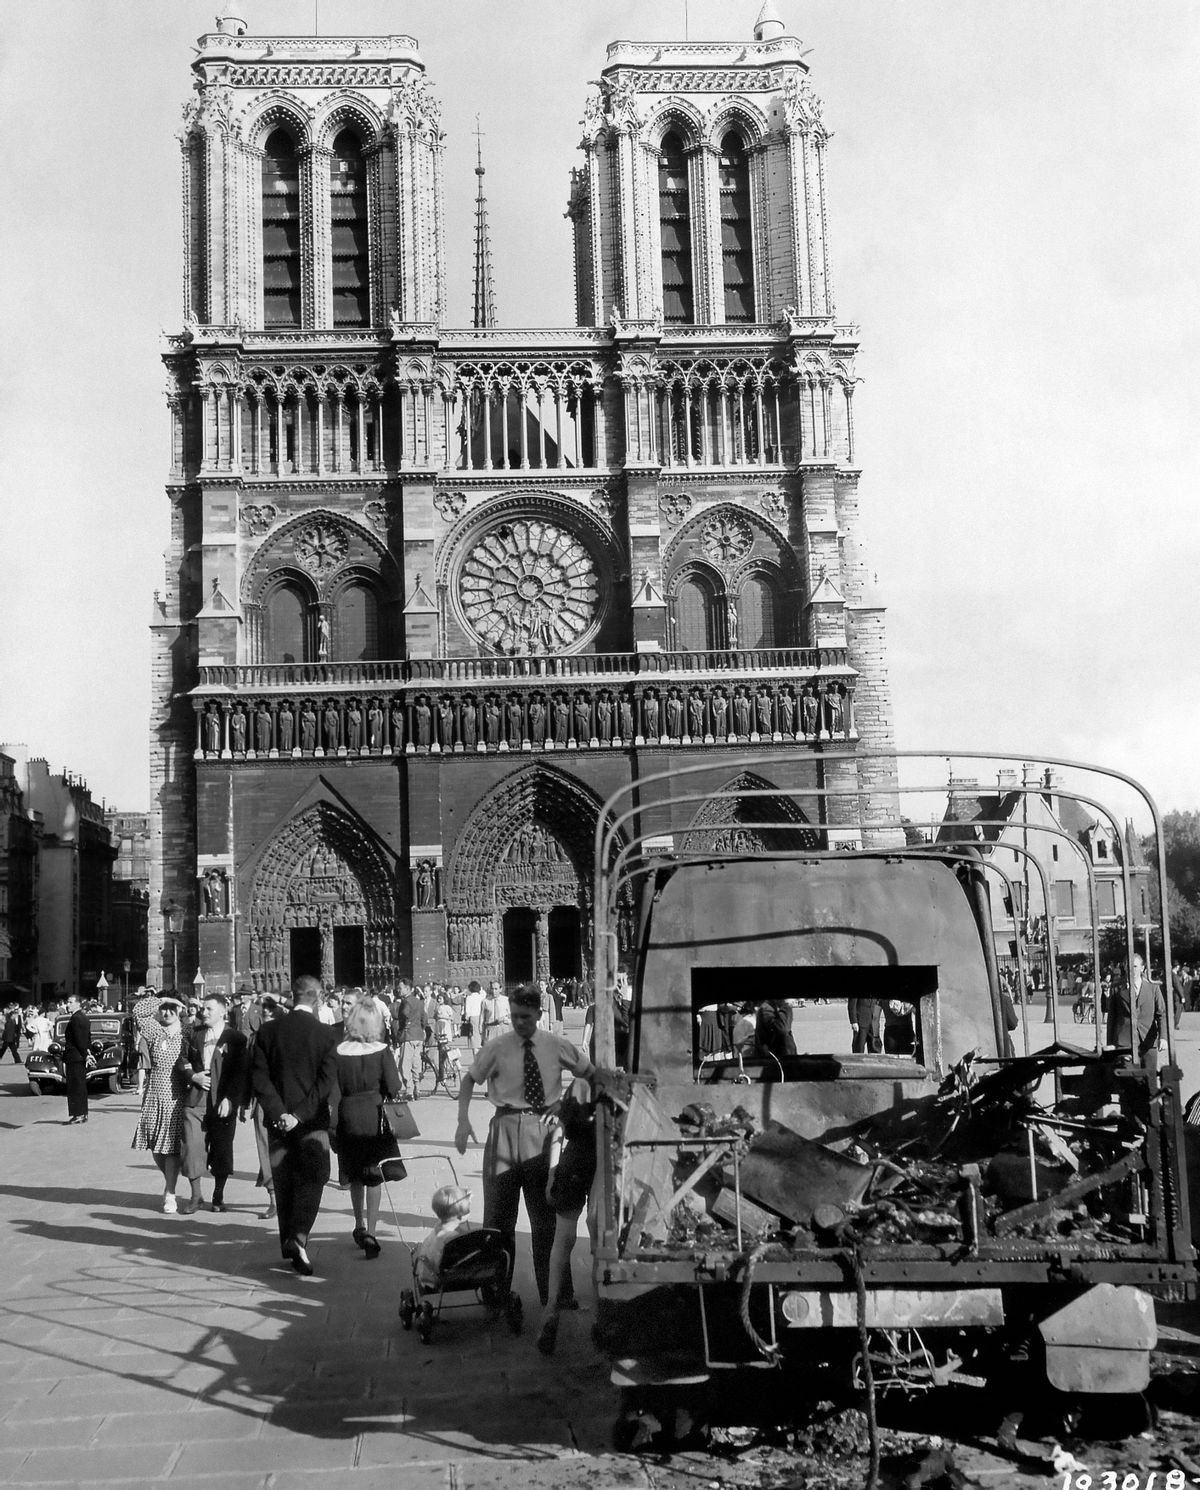 How The Hunchback of Notre Dame inspired the cathedral's 19th